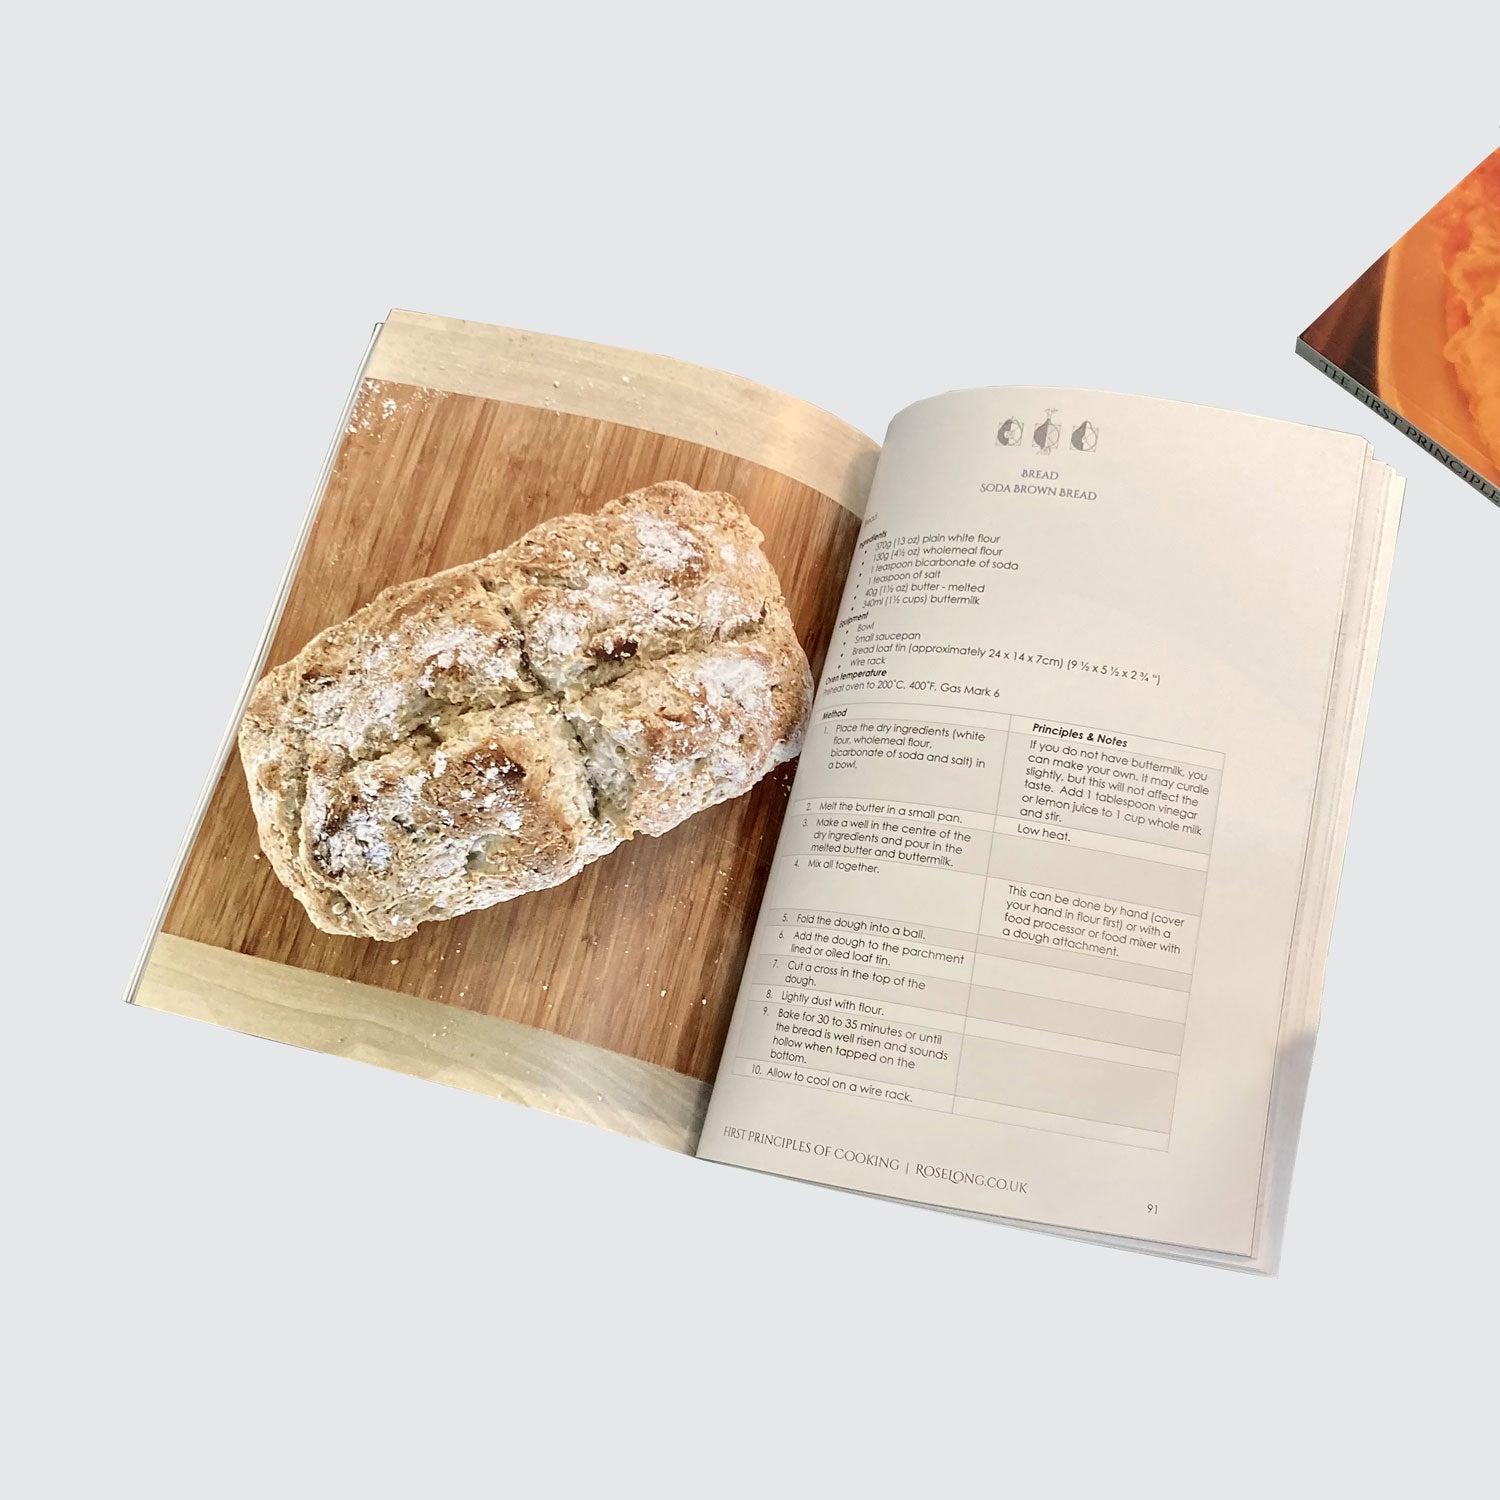 First principles of Cooking recipe book showing page opened at the Soda bread recipe.